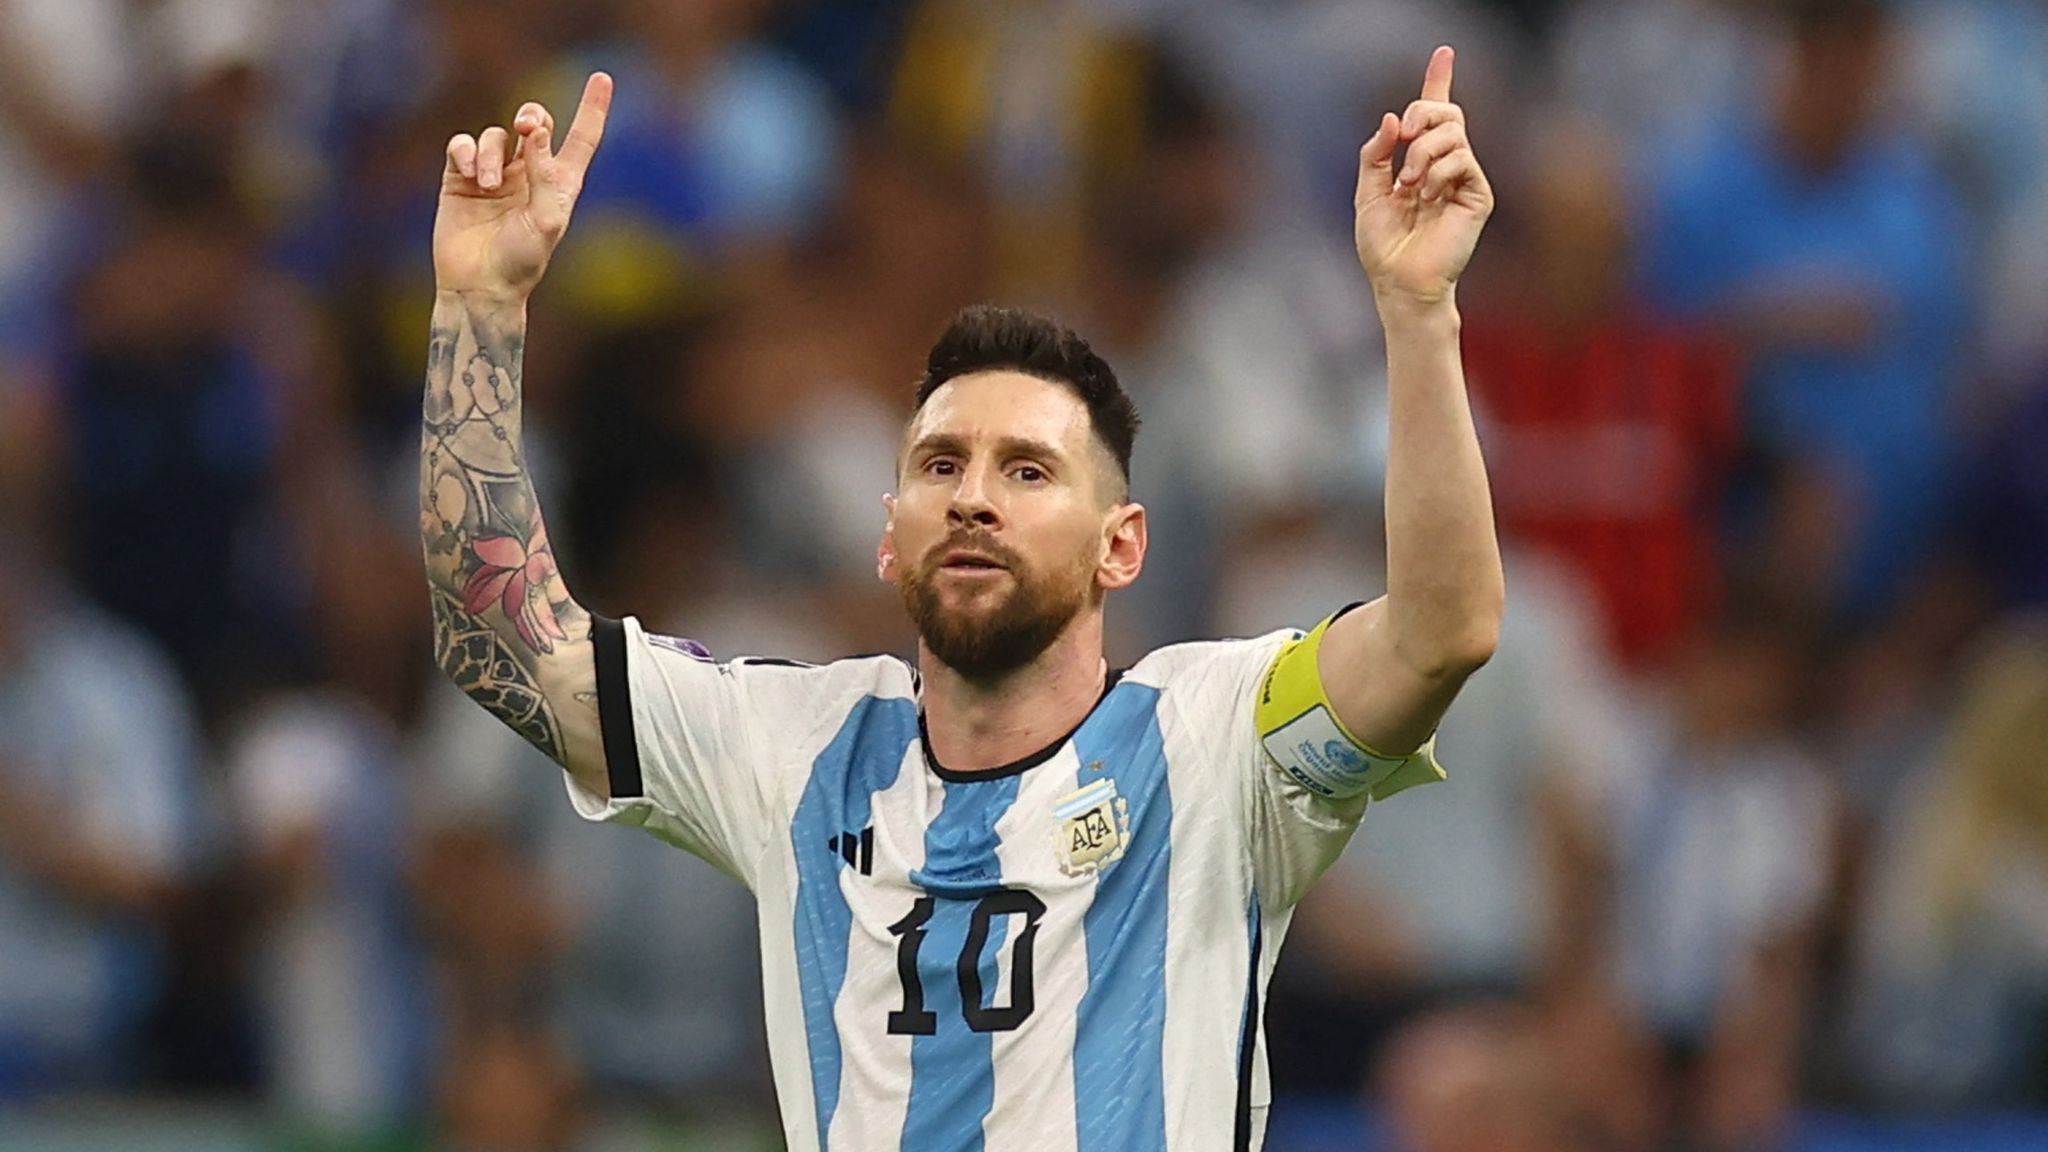 Lionel Messi in numbers: After 793 goals and seven Ballon d'Ors - his World  Cup win cements his spot as one of the world's greatest footballers | World  News | Sky News